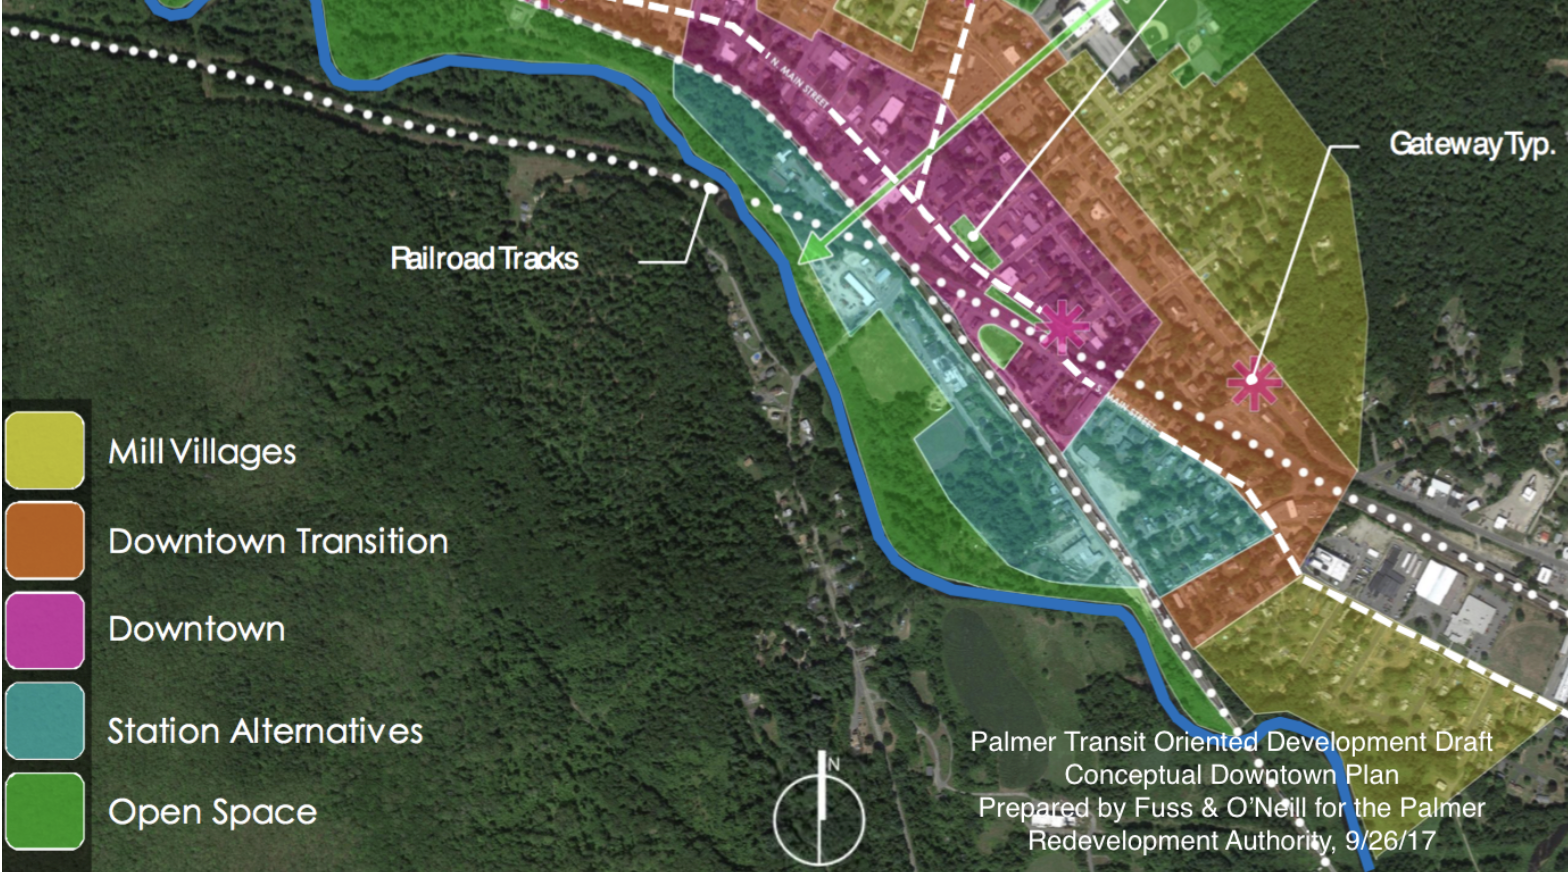 Slide showing aerial view of Palmer Depot Village surrounding intersection of east-west and north-south tracks. Colors indicate location of Mill Villages, Downtown Transition, Downtown, Station Alternatives, and Open Space. Detail from slide in Palmer Transit Oriented Development Draft Conceptual Downtown Plan slideshow. Prepared by Fuss & O'Neill for the Palmer Redevelopment Authority, 9/26/17.